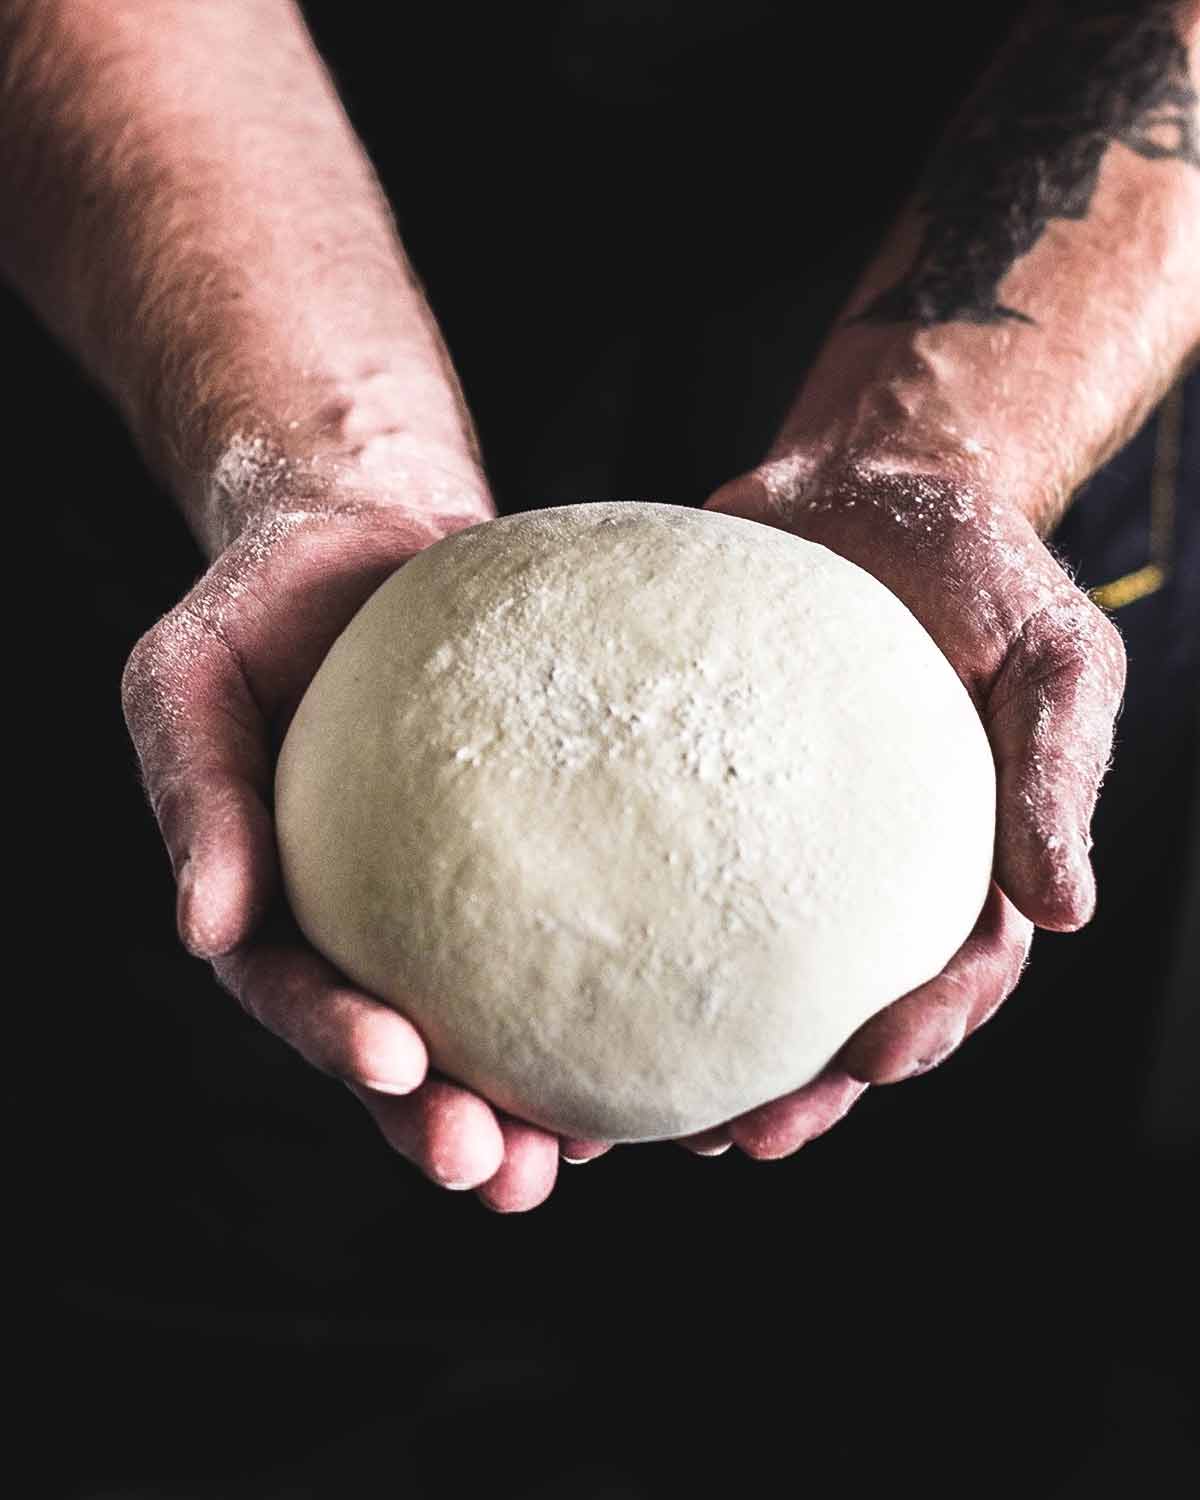 A person holding a ball of pizza dough.